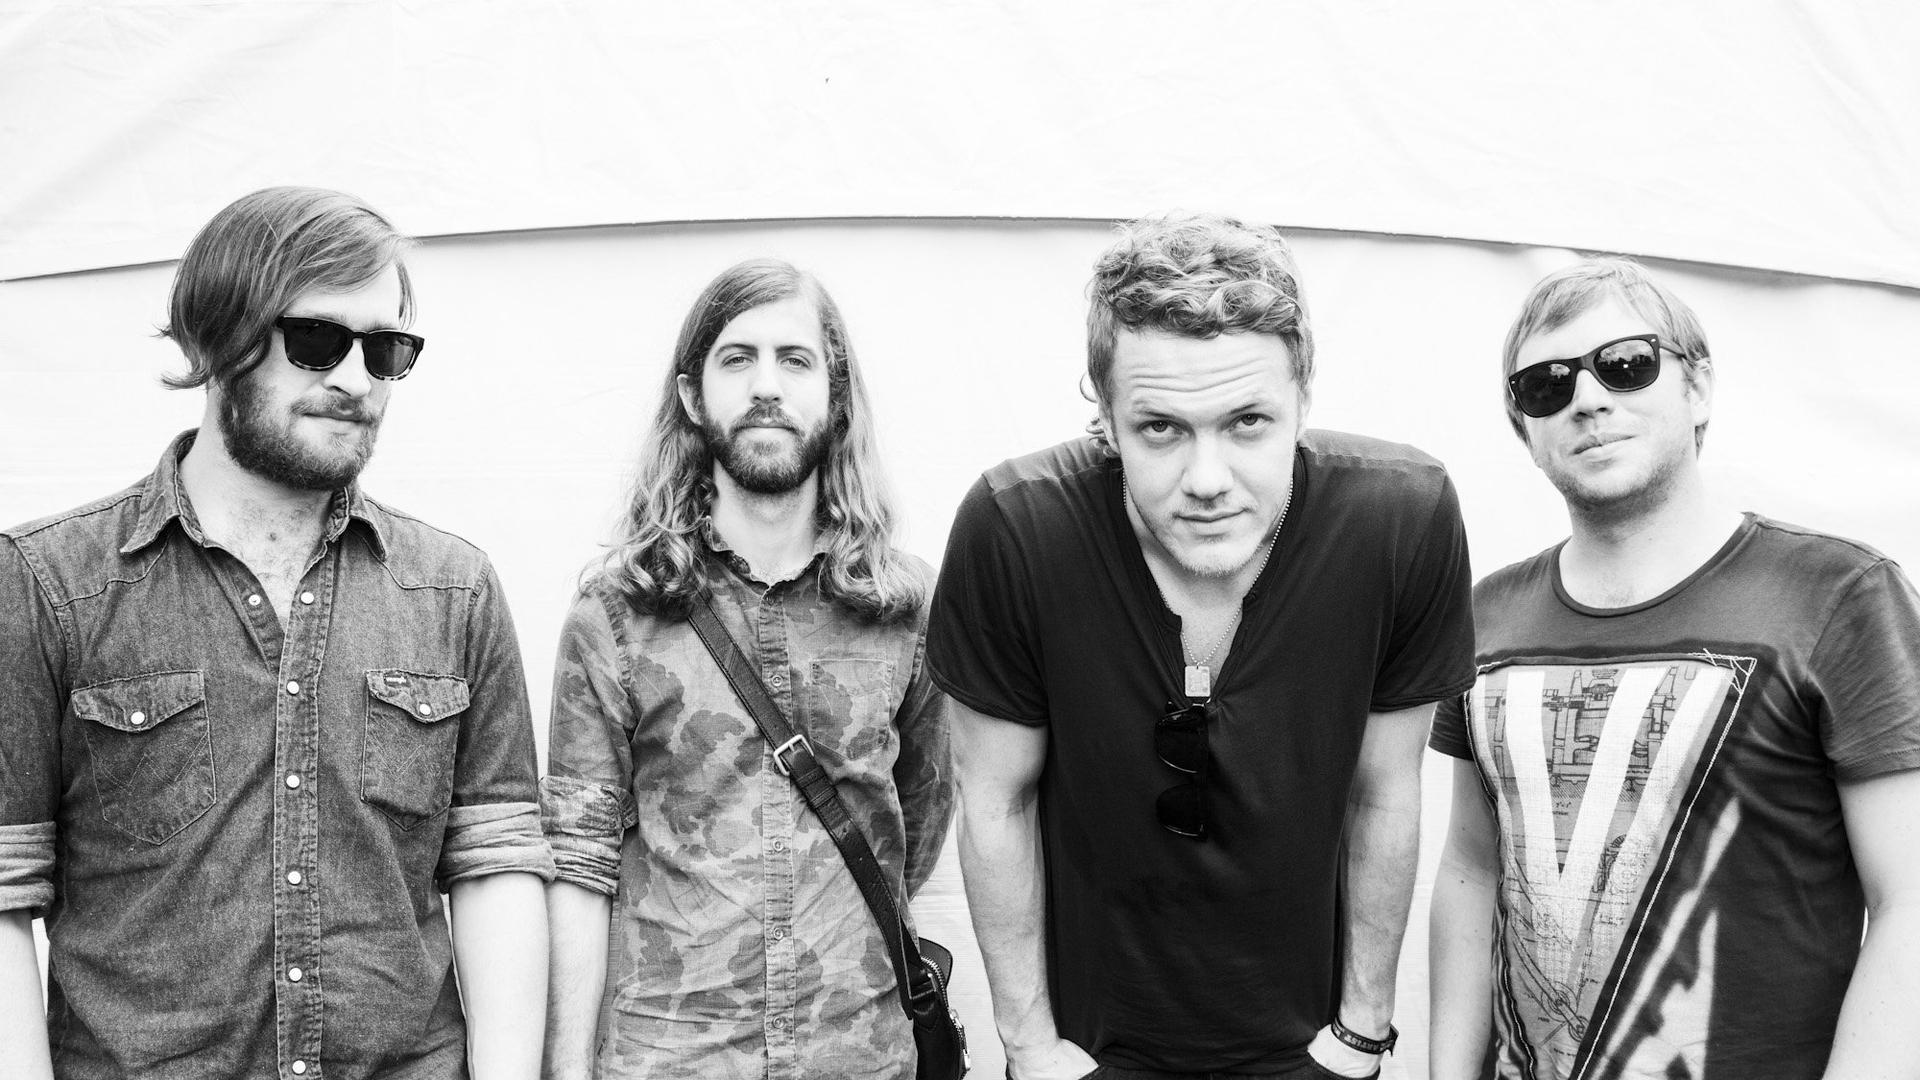 Hd White And Black Picture Of Imagine Dragons Wallpaper - HD Wallpaper 